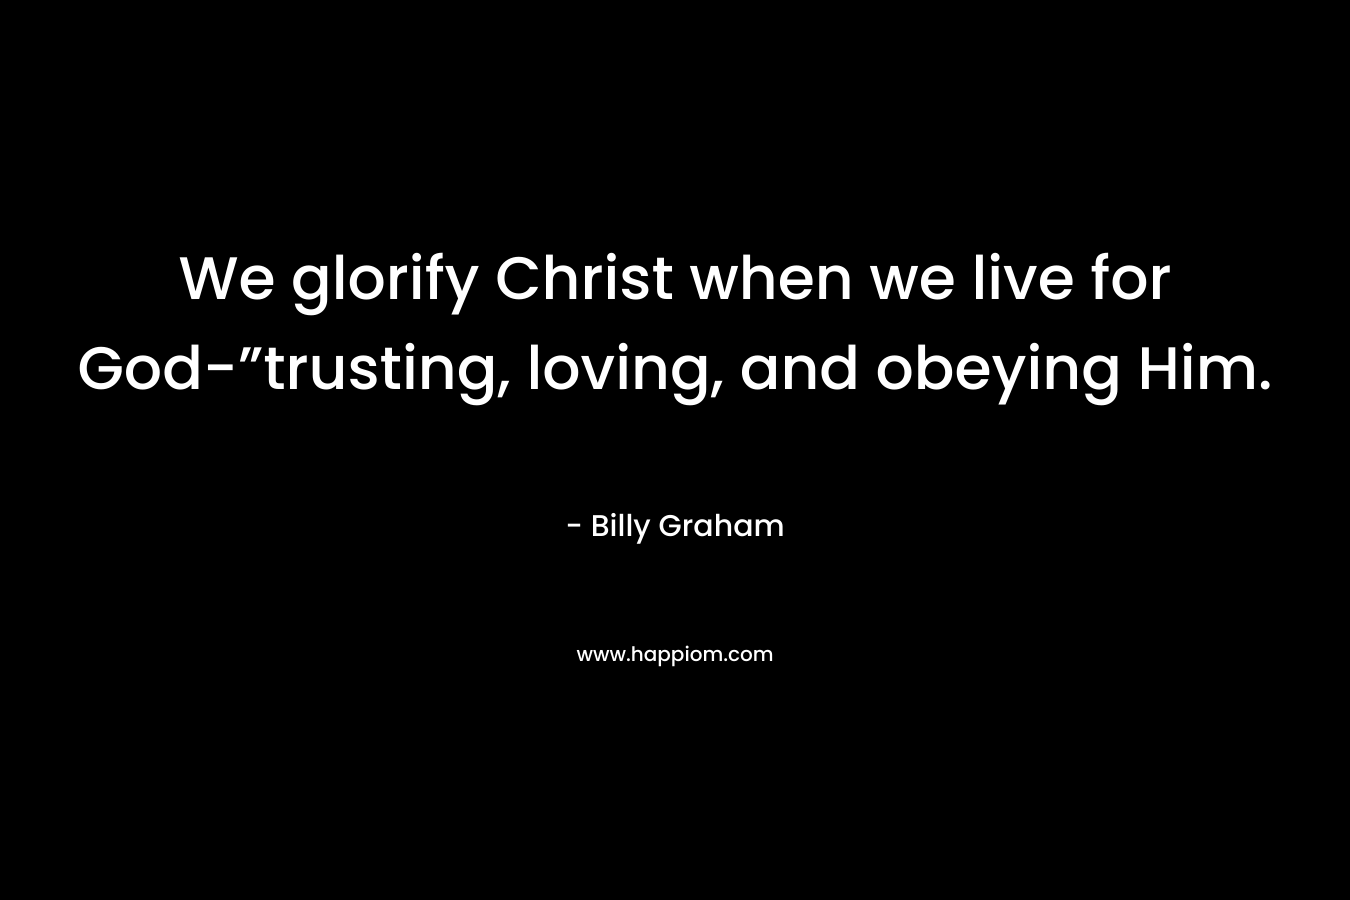 We glorify Christ when we live for God-”trusting, loving, and obeying Him.